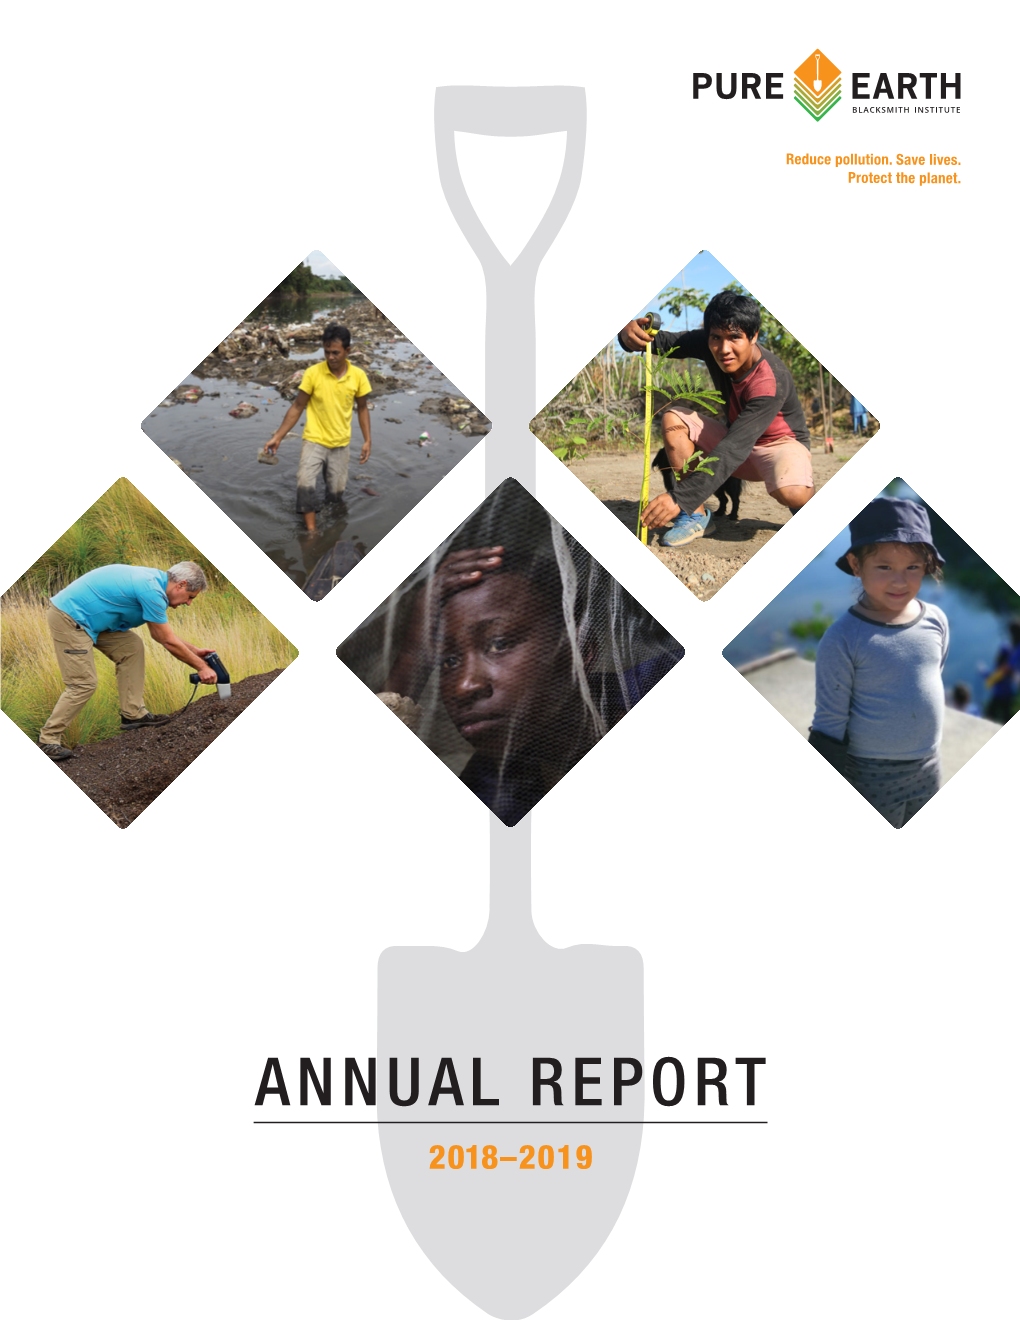 Annual Report 2018–2019 Contents